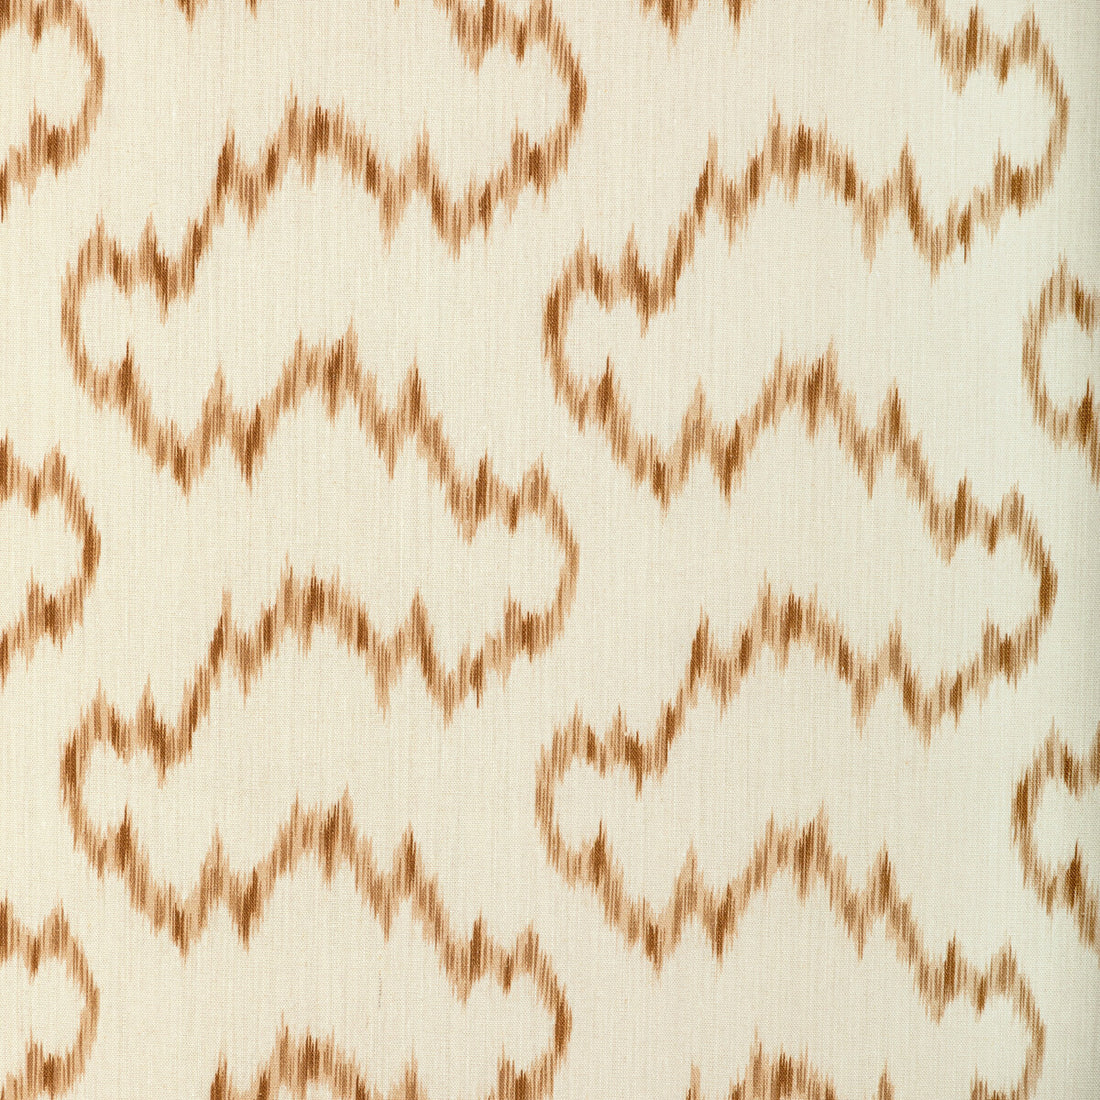 Mallorcan Ikat fabric in camel color - pattern 2022104.6116.0 - by Lee Jofa in the Sarah Bartholomew collection